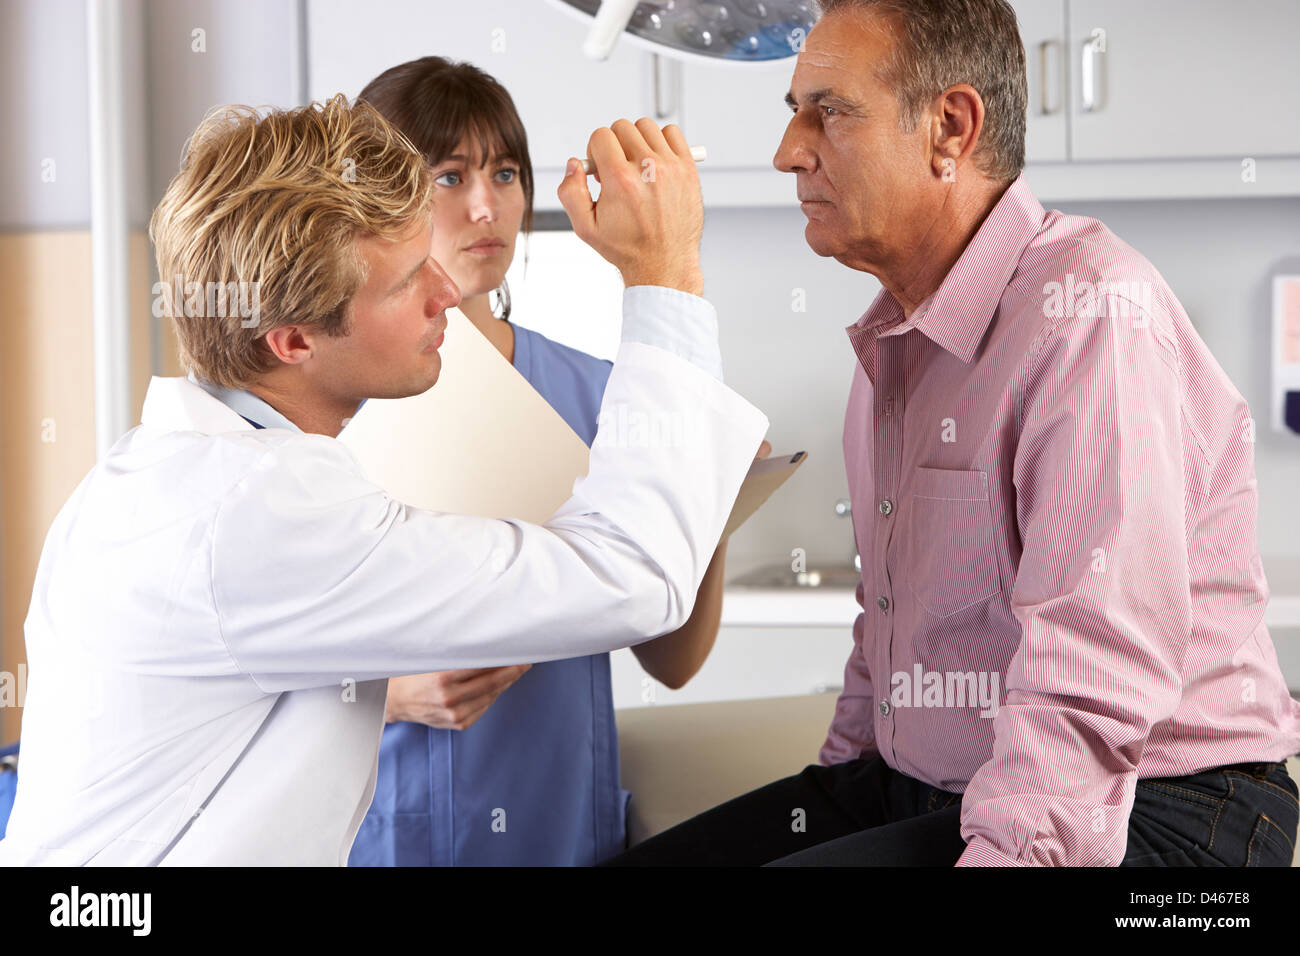 Doctor Examining Male Patient's Eyes Stock Photo